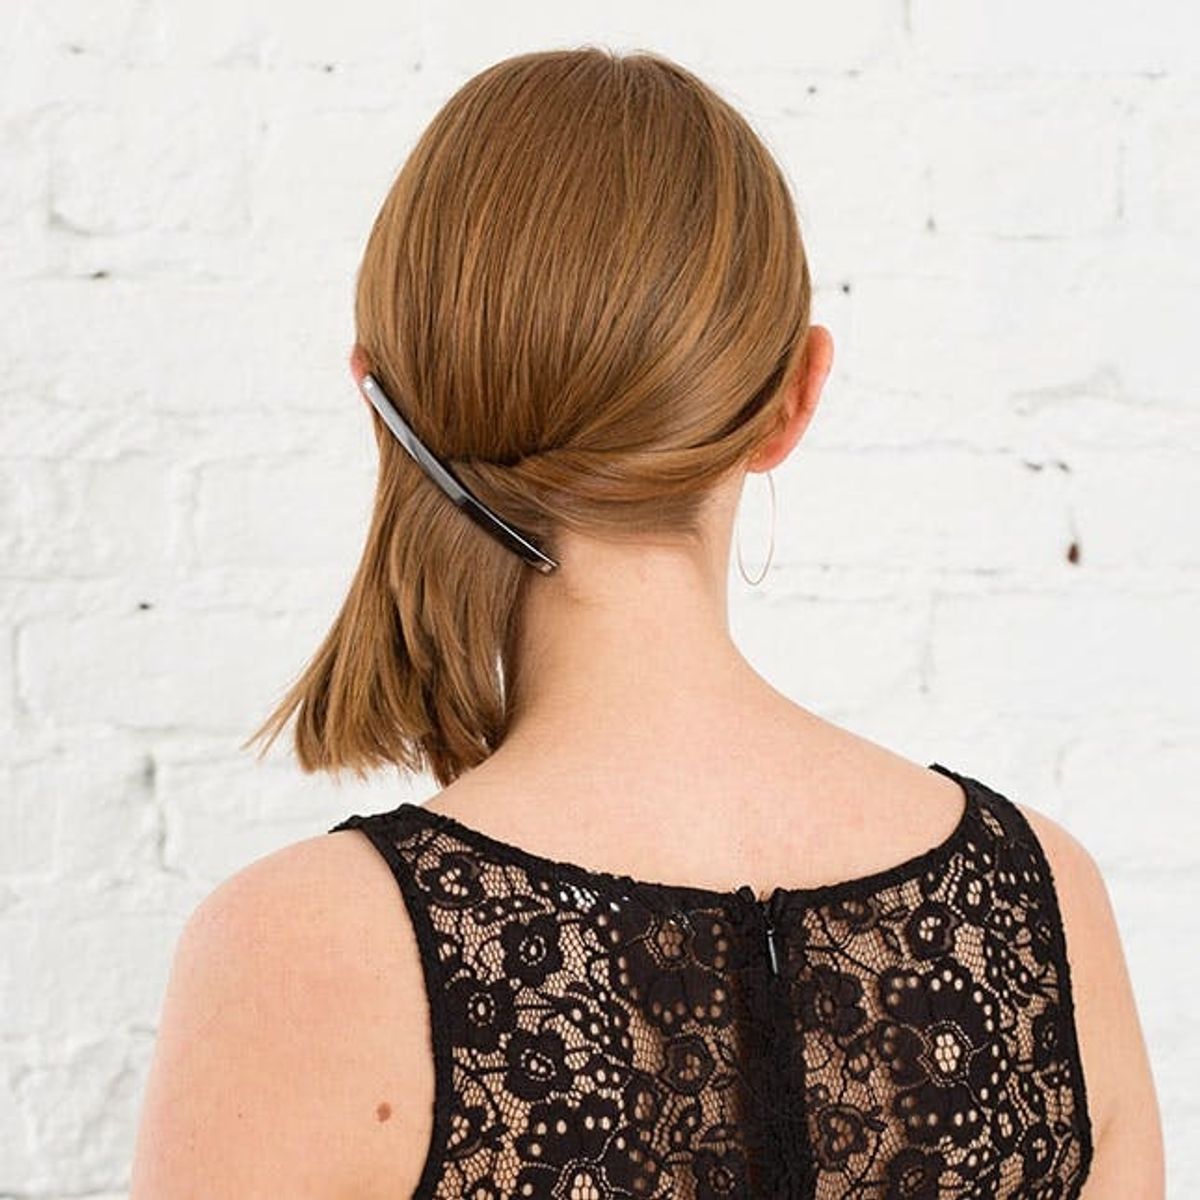 3 Easy, 5-Minute Hairstyles Using Emma Stone’s Metal Barrette